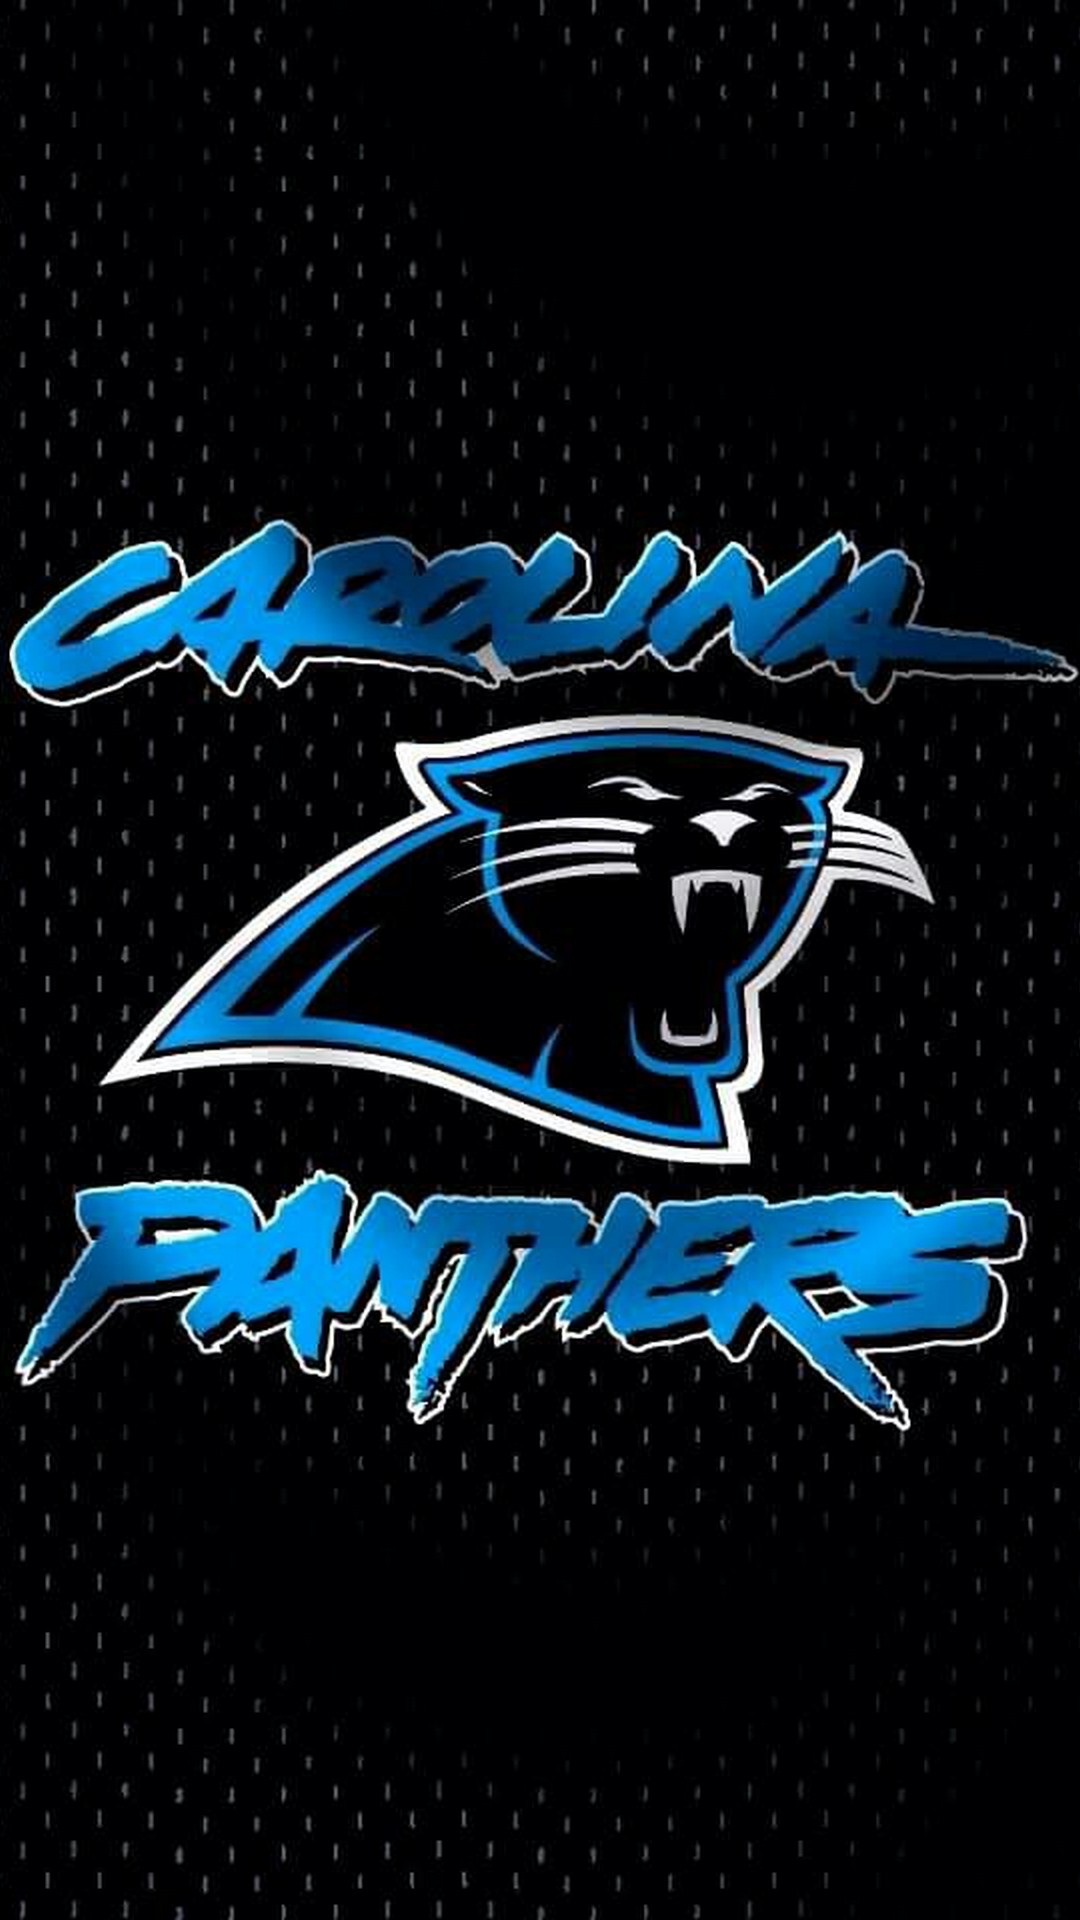 Carolina Panthers iPhone 8 Wallpaper With high-resolution 1080X1920 pixel. Download and set as wallpaper for Apple iPhone X, XS Max, XR, 8, 7, 6, SE, iPad, Android